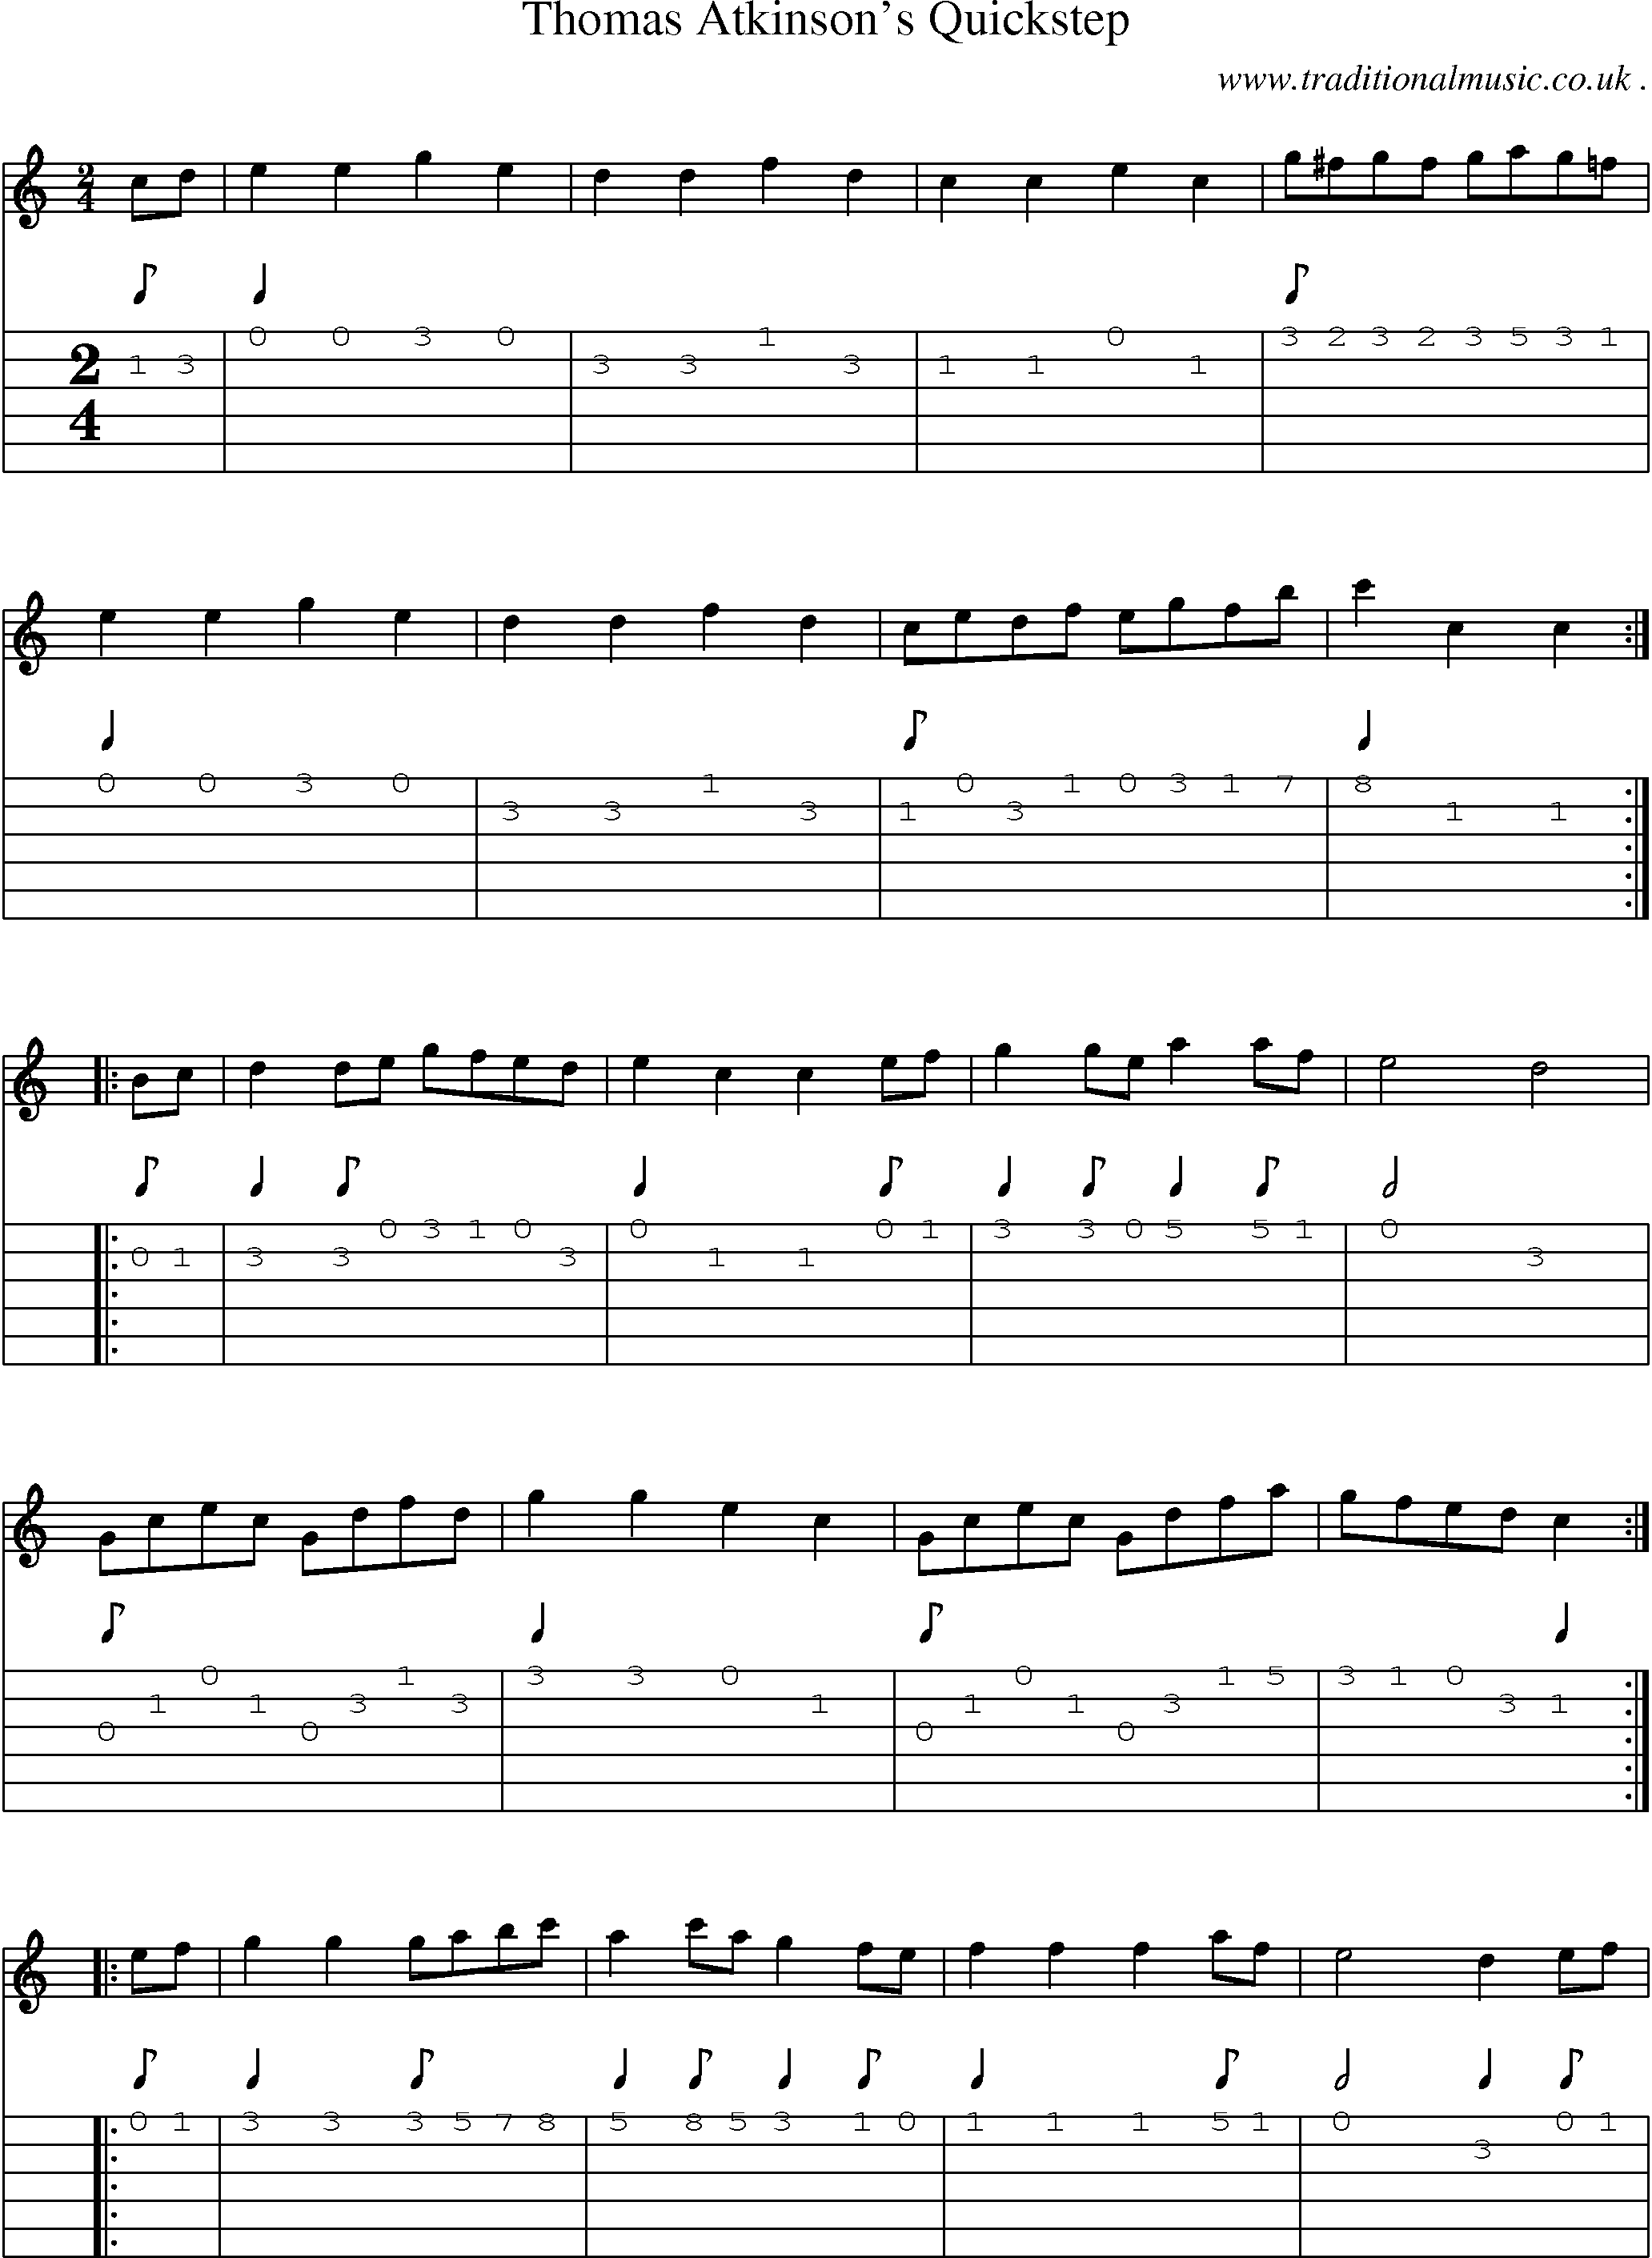 Sheet-Music and Guitar Tabs for Thomas Atkinsons Quickstep